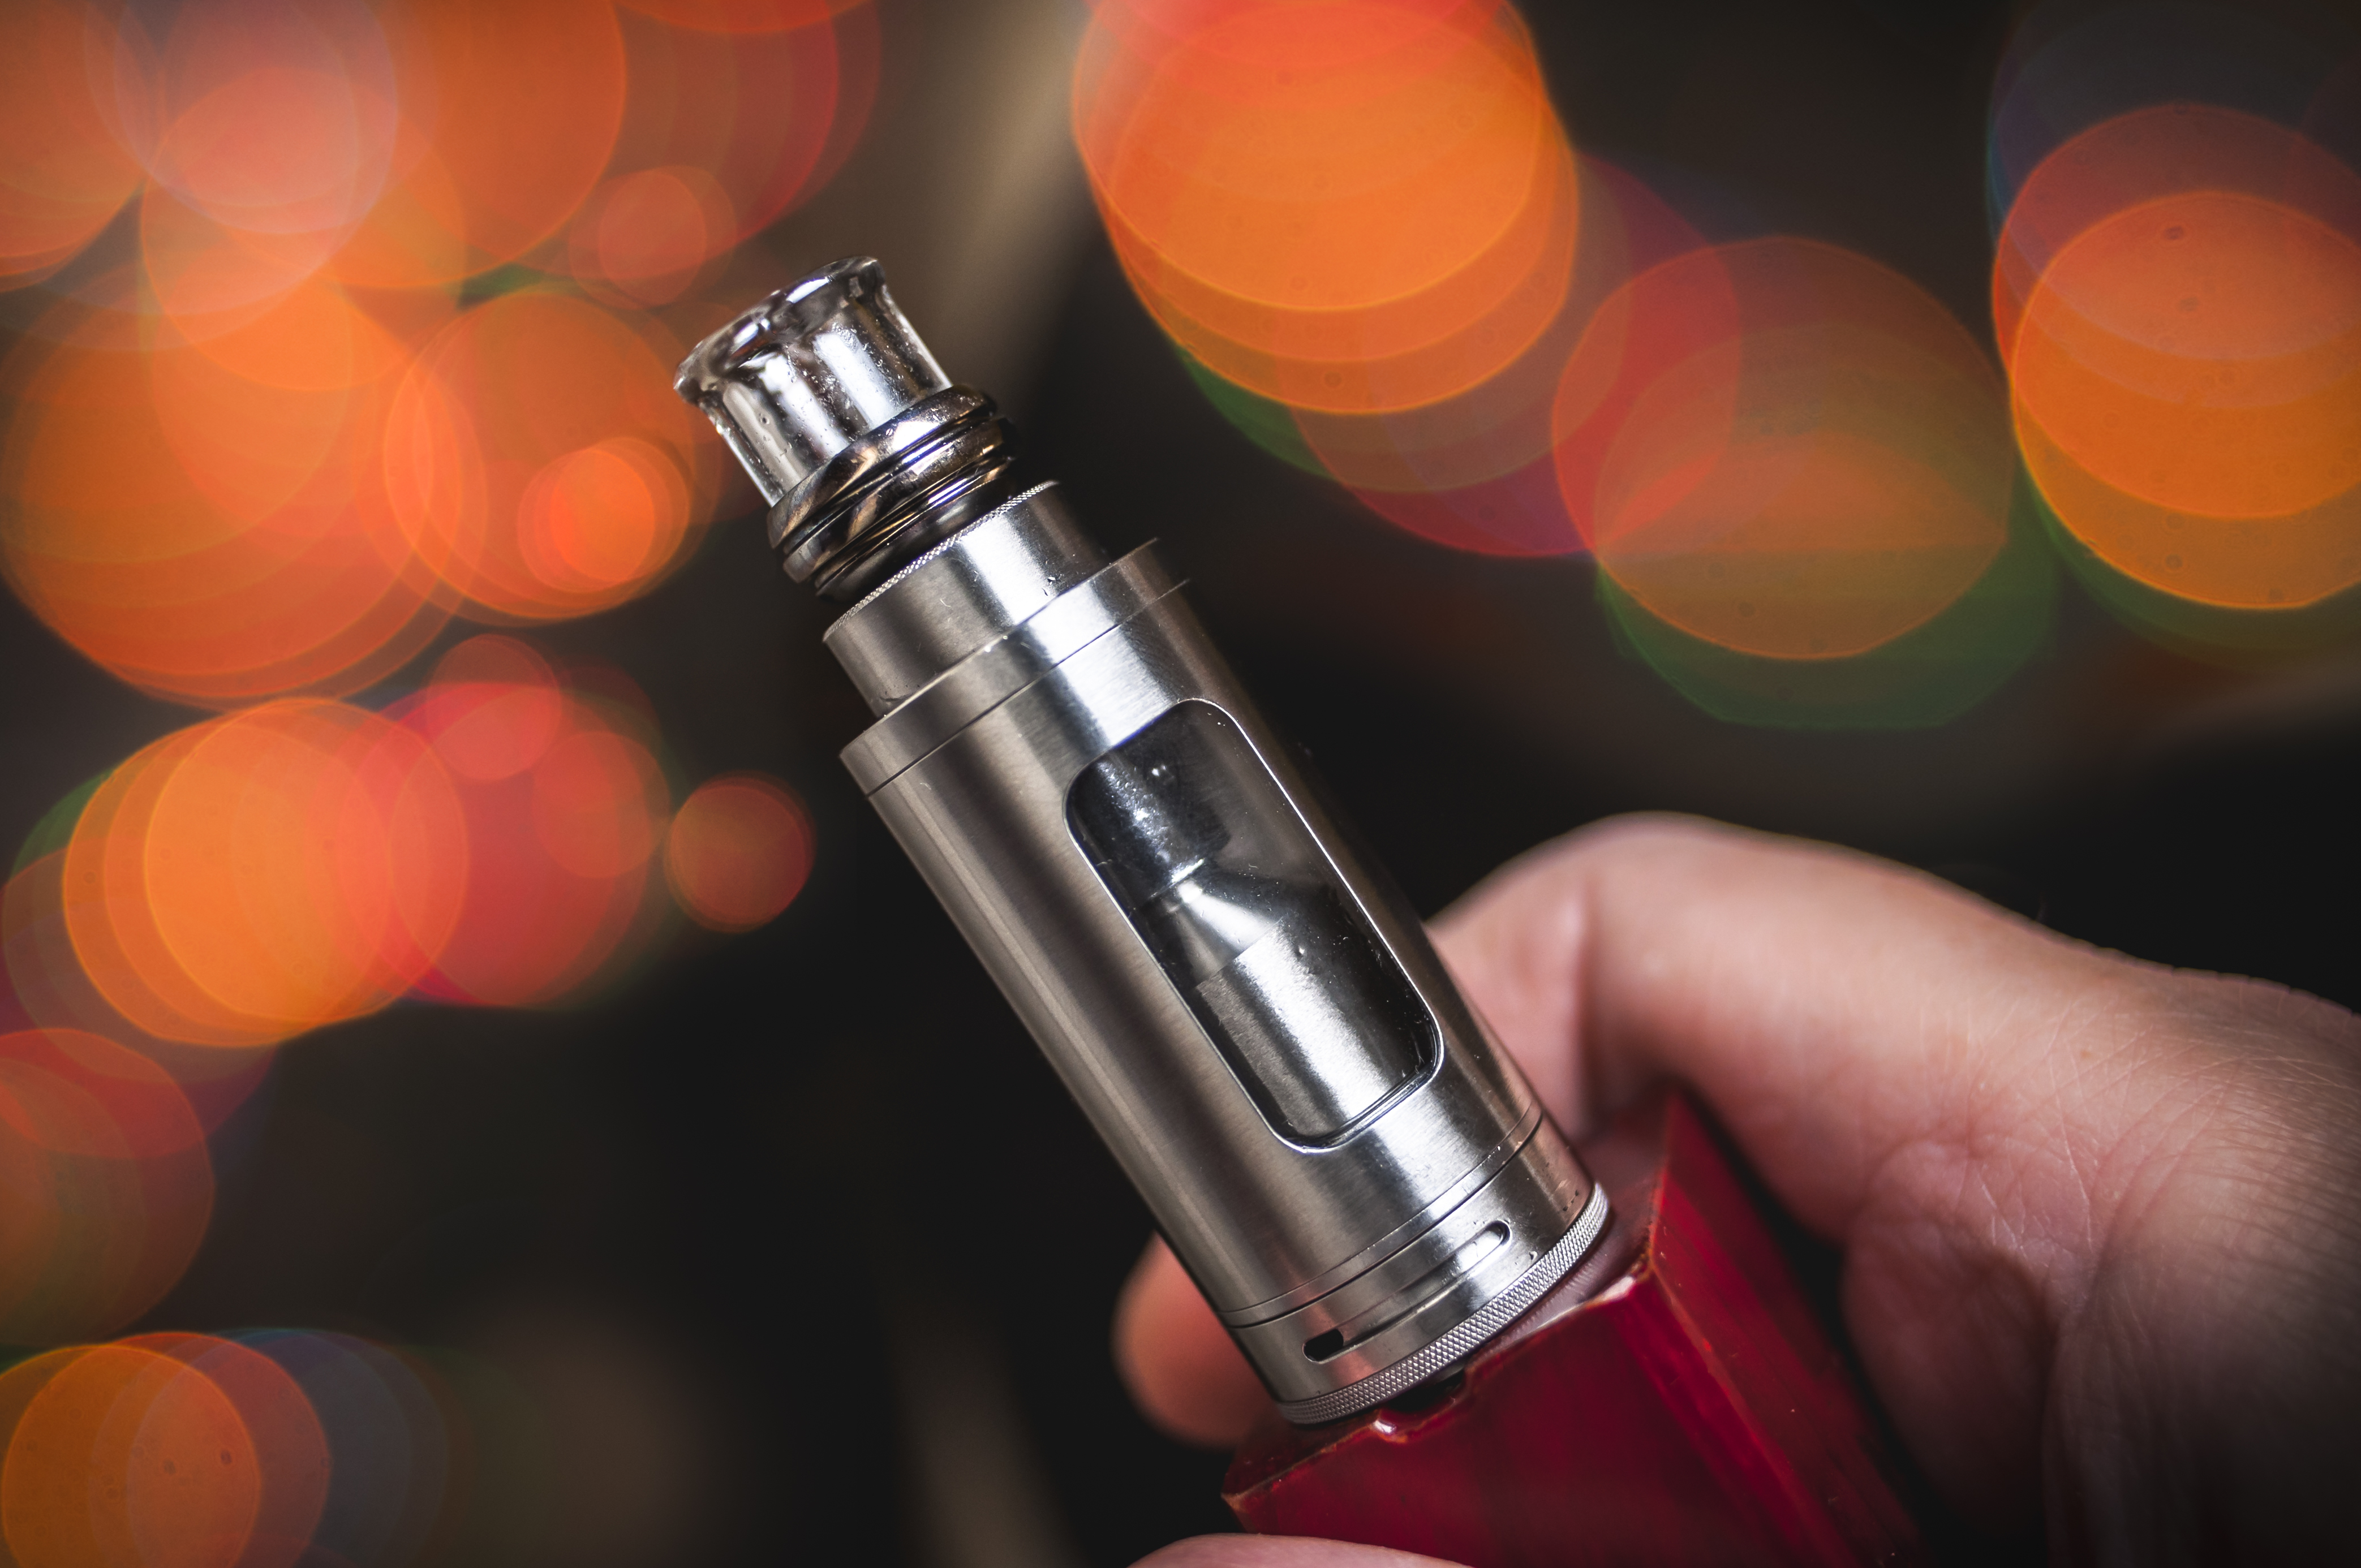 The Best Vape Tank for Flavour - Find Out Which One Is Right for You